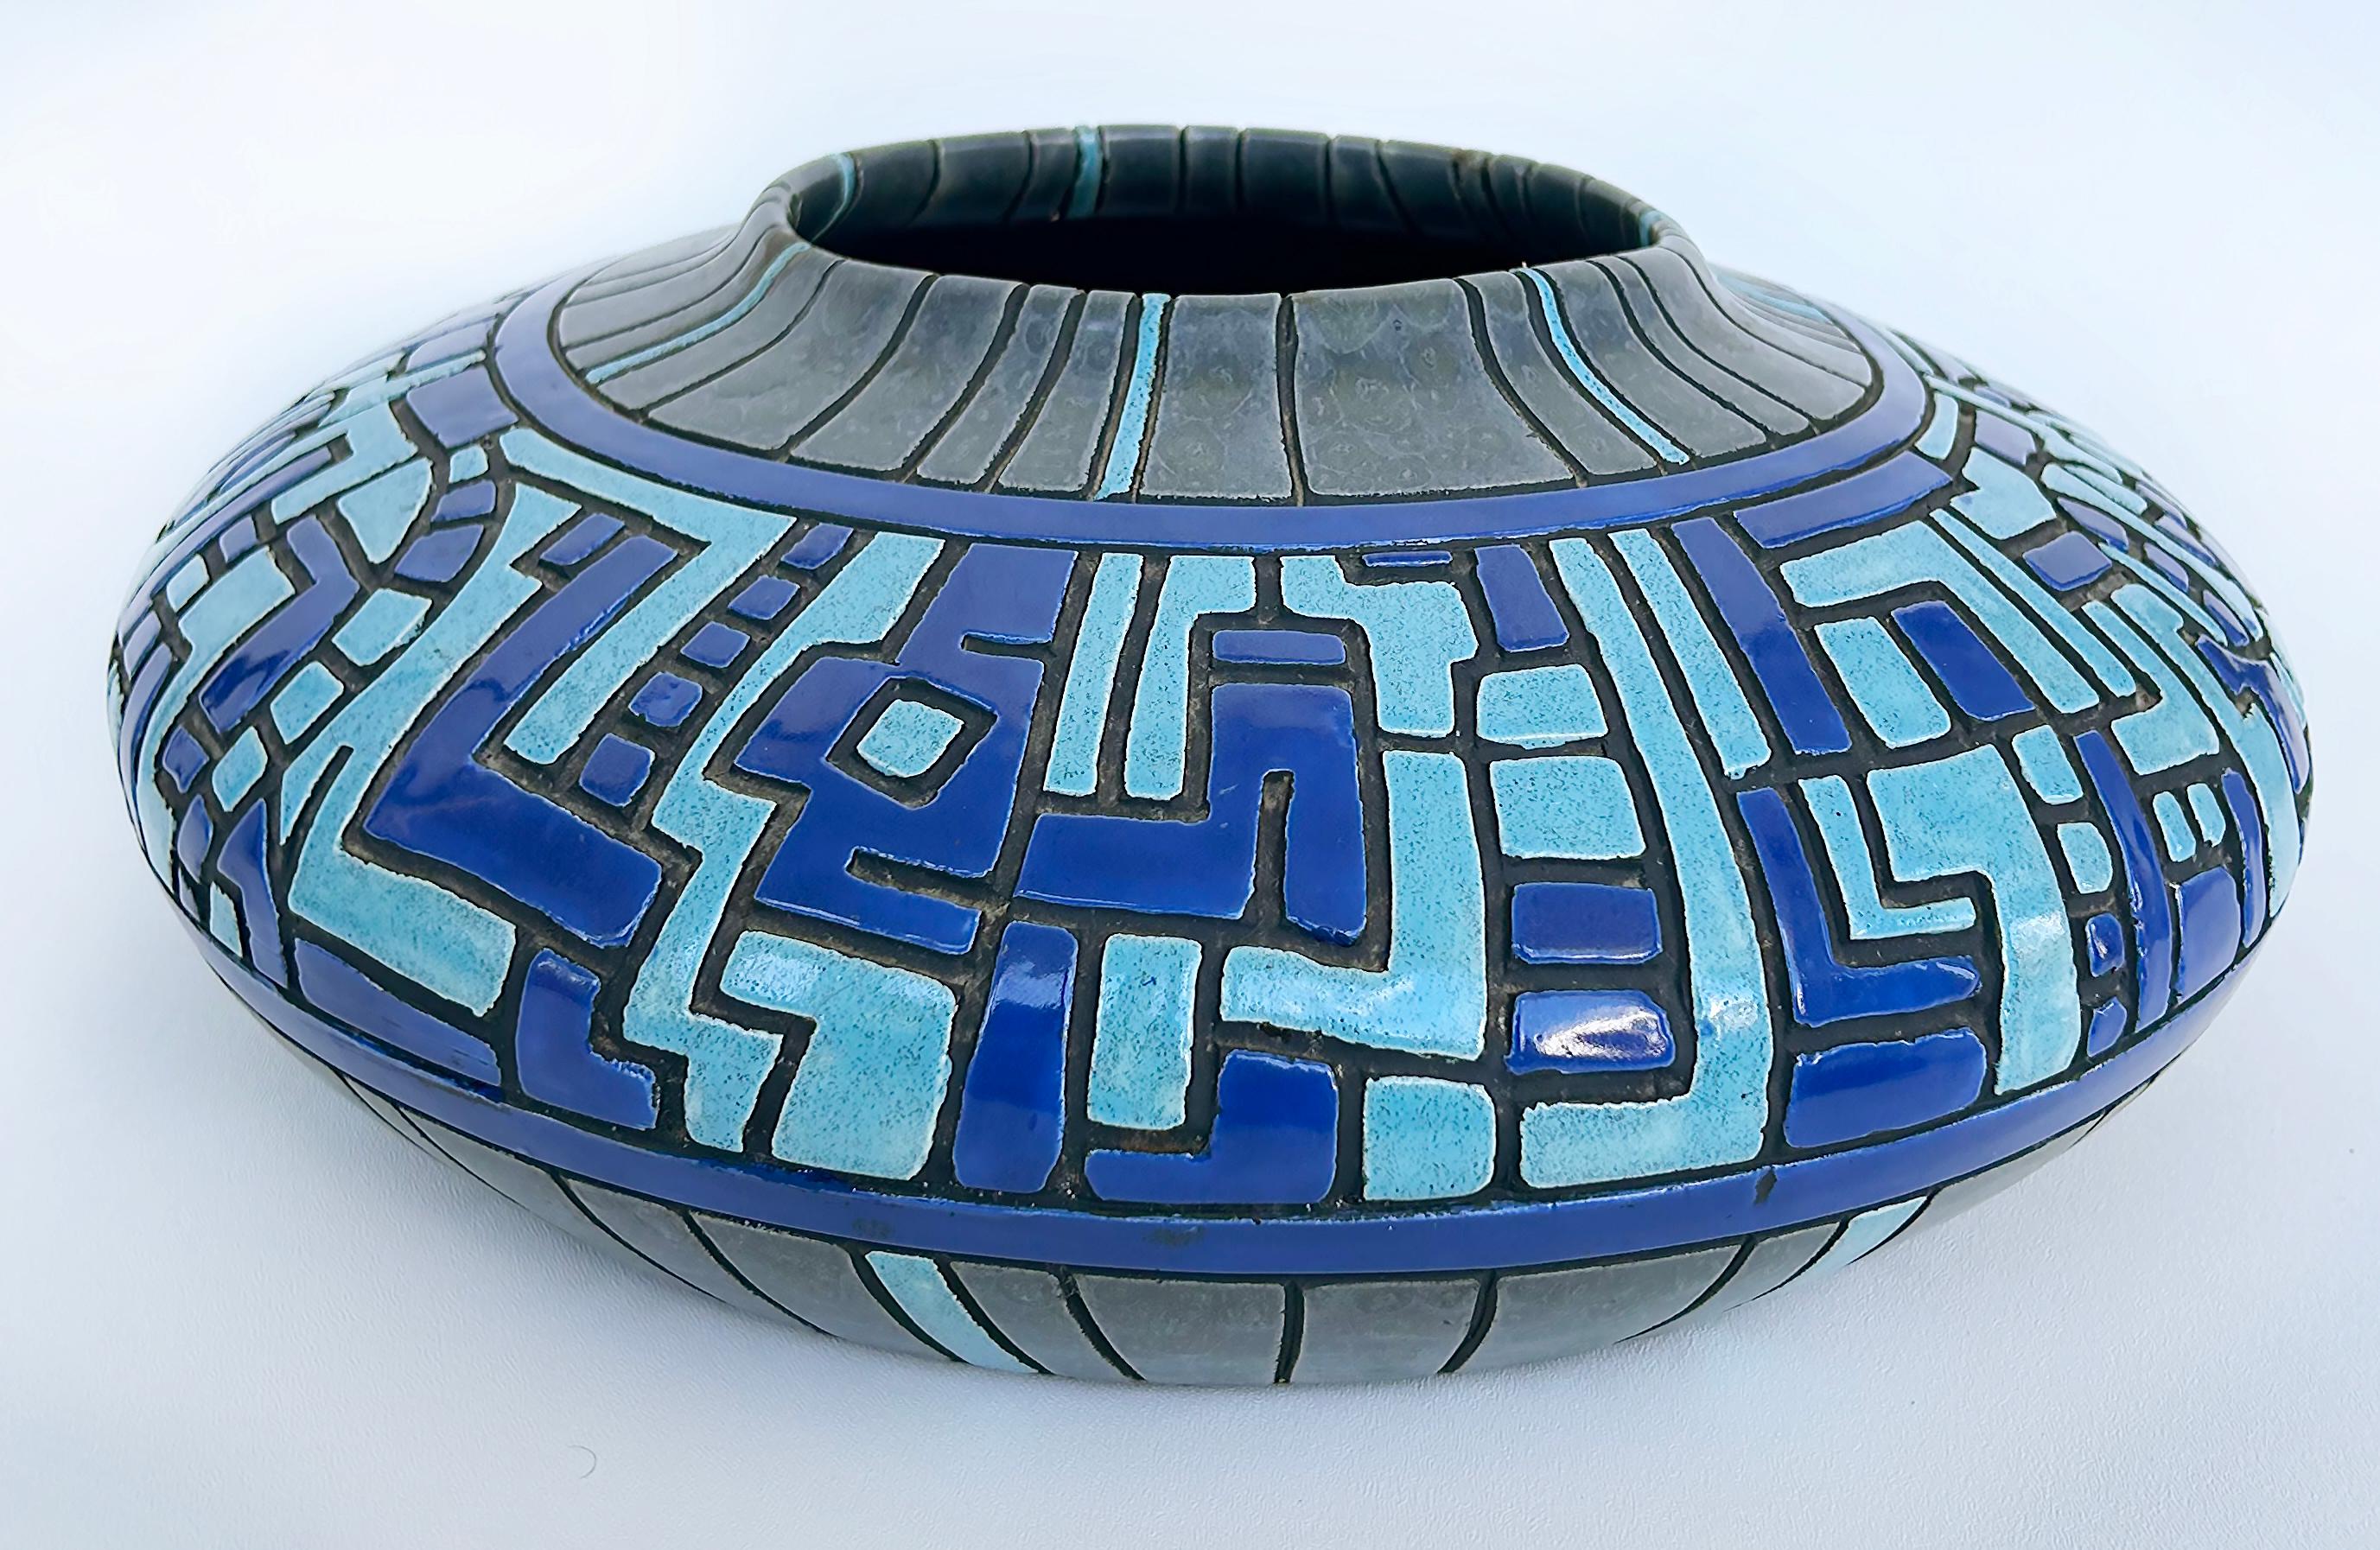 Vintage Modernist Ceramic Centerpiece Geometric Bowl, Signed 

Offered for sale is a large ceramic centerpiece bowl with glazed patterns and incised borders. The blow is gray, blue, and turquoise. The base is signed as shown and the modernist feel